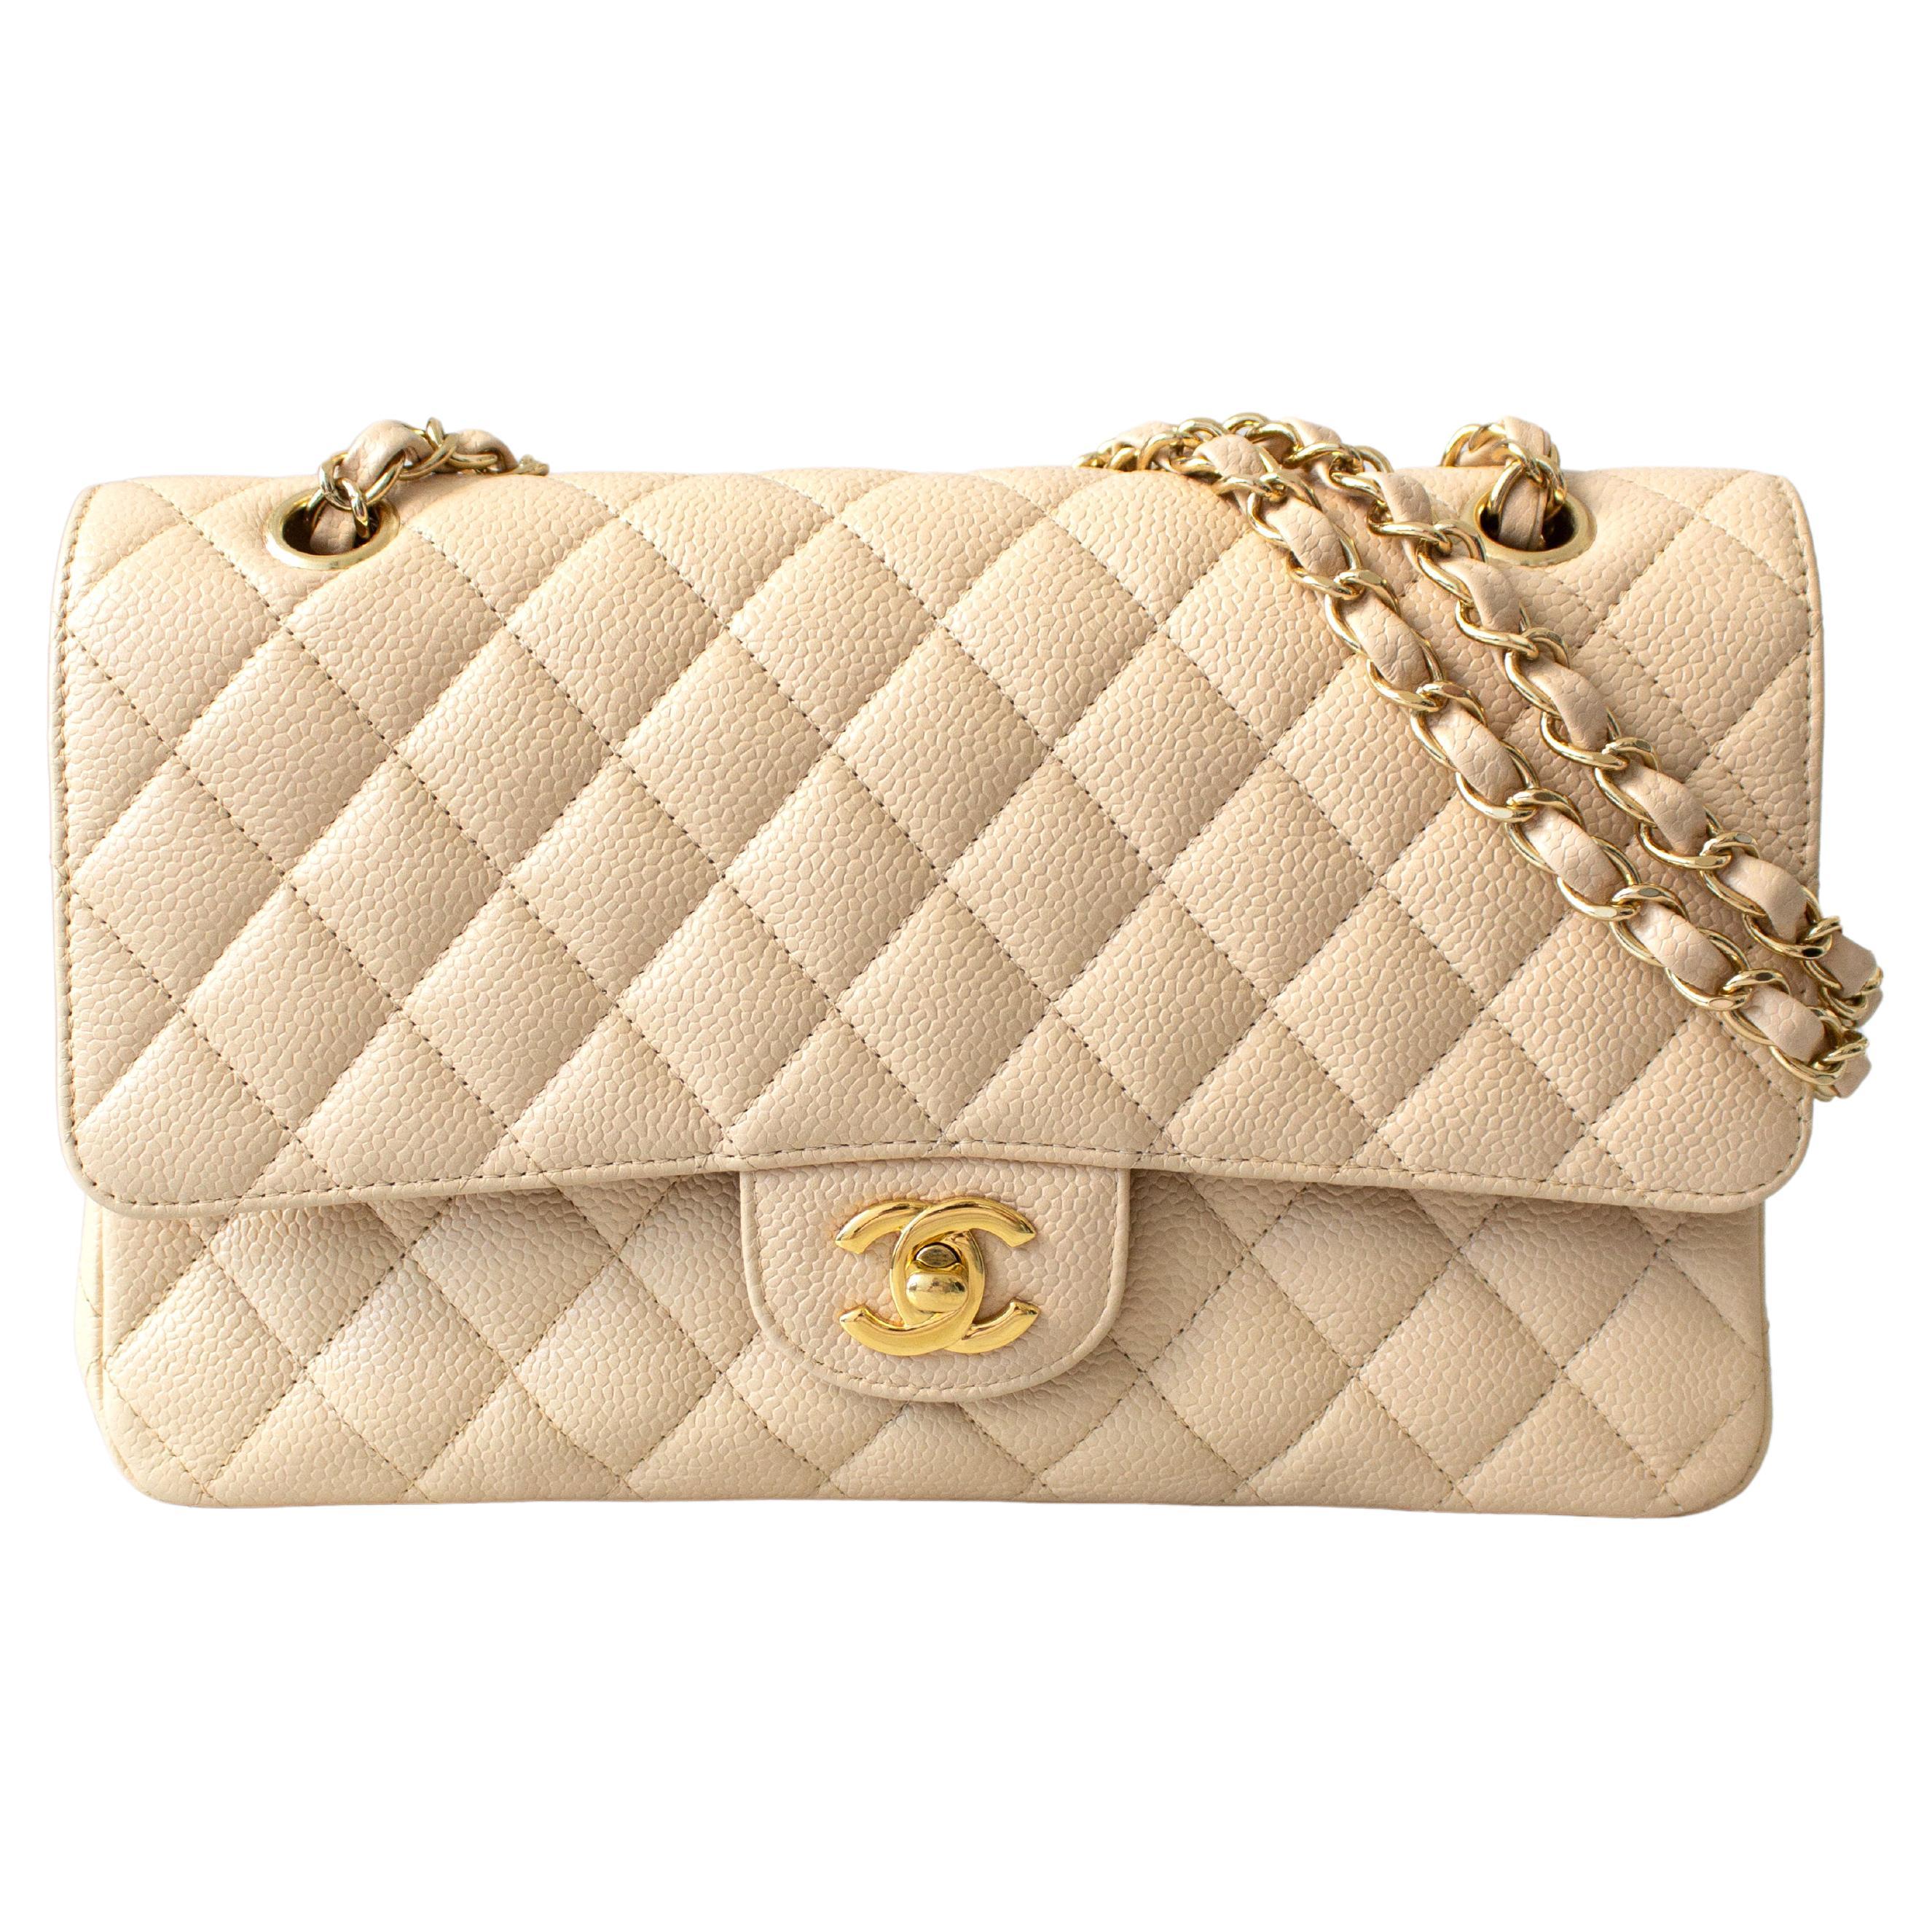 Chanel Medium Classic Double Flap Beige Clair Caviar Leather Gold GHW 2010 Bag For Sale